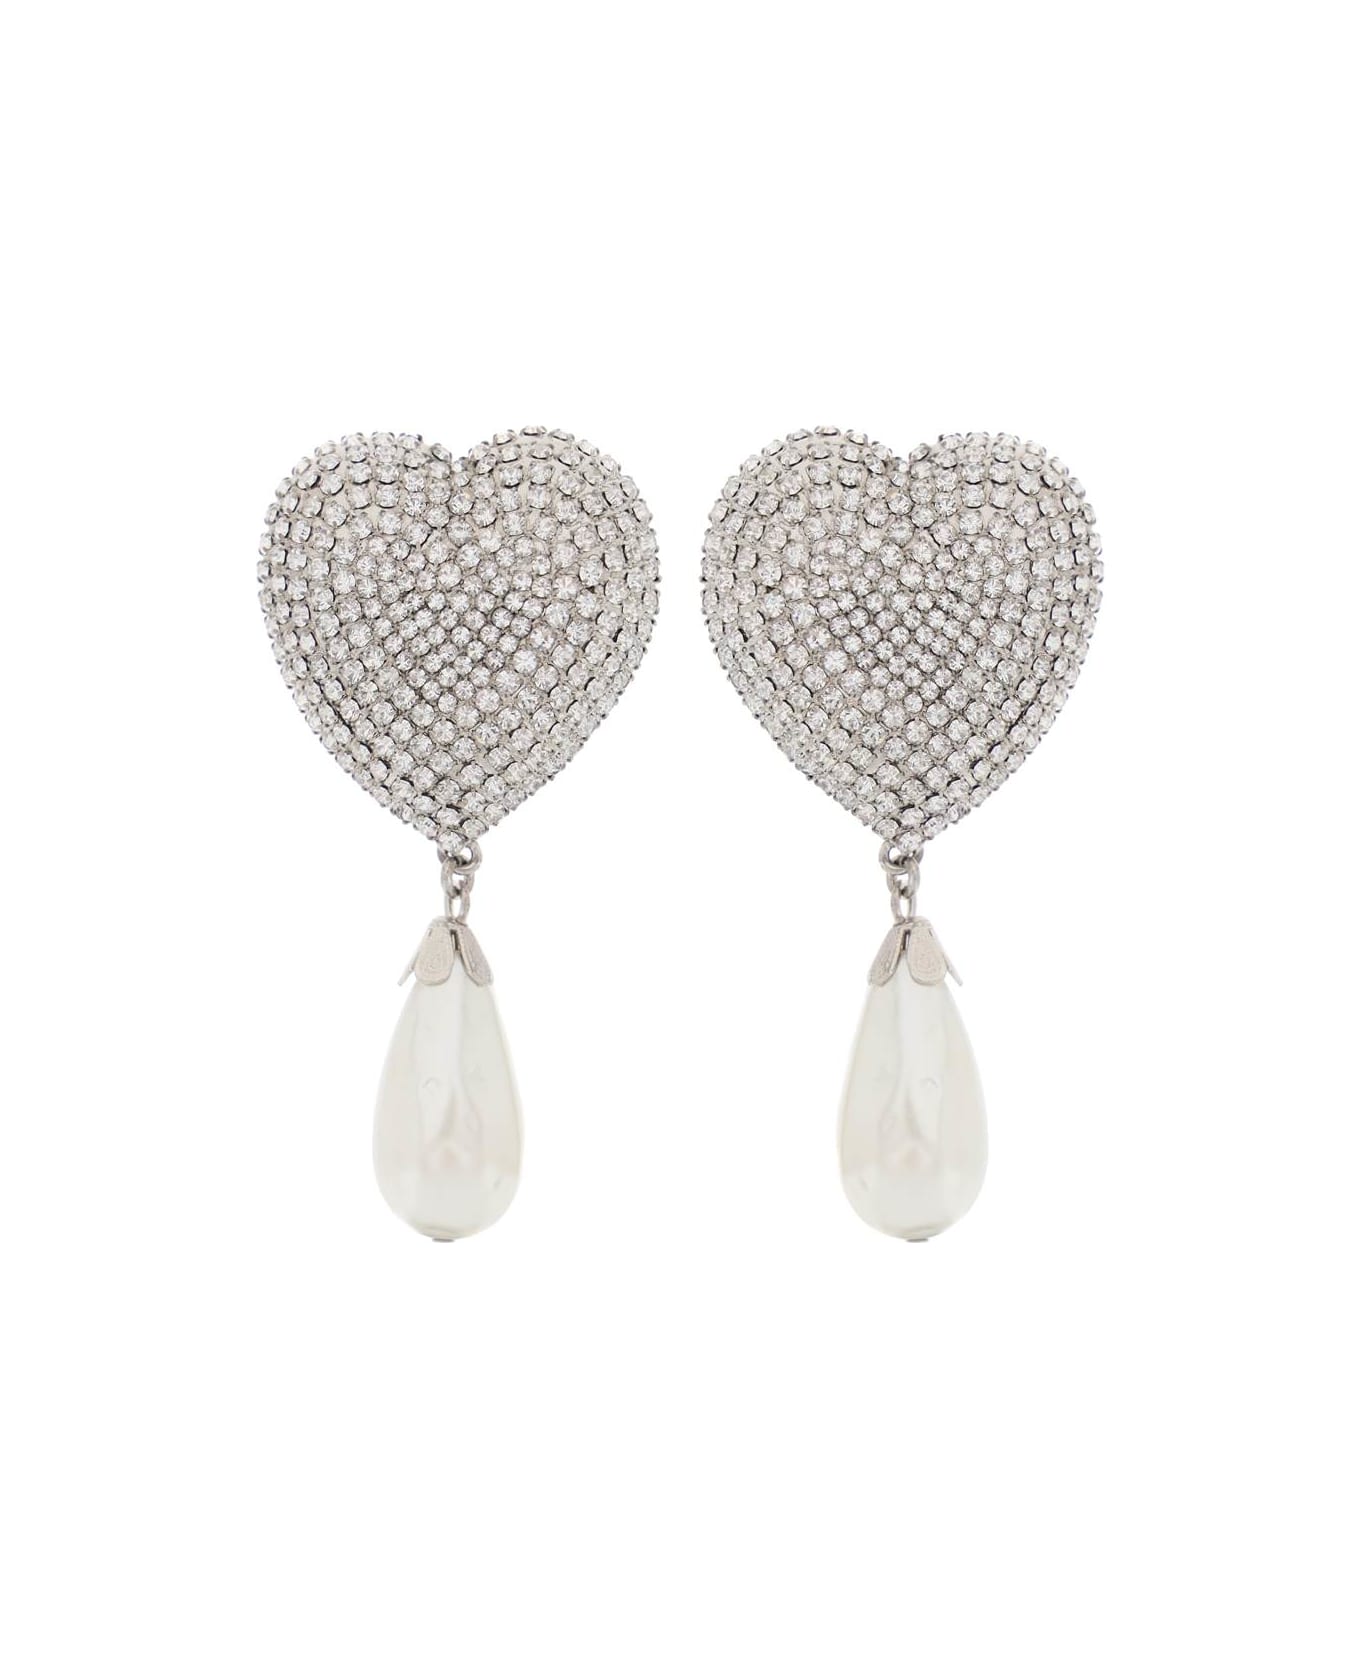 Alessandra Rich Heart Crystal Earrings With Pearls - CRY SILVER (Silver)